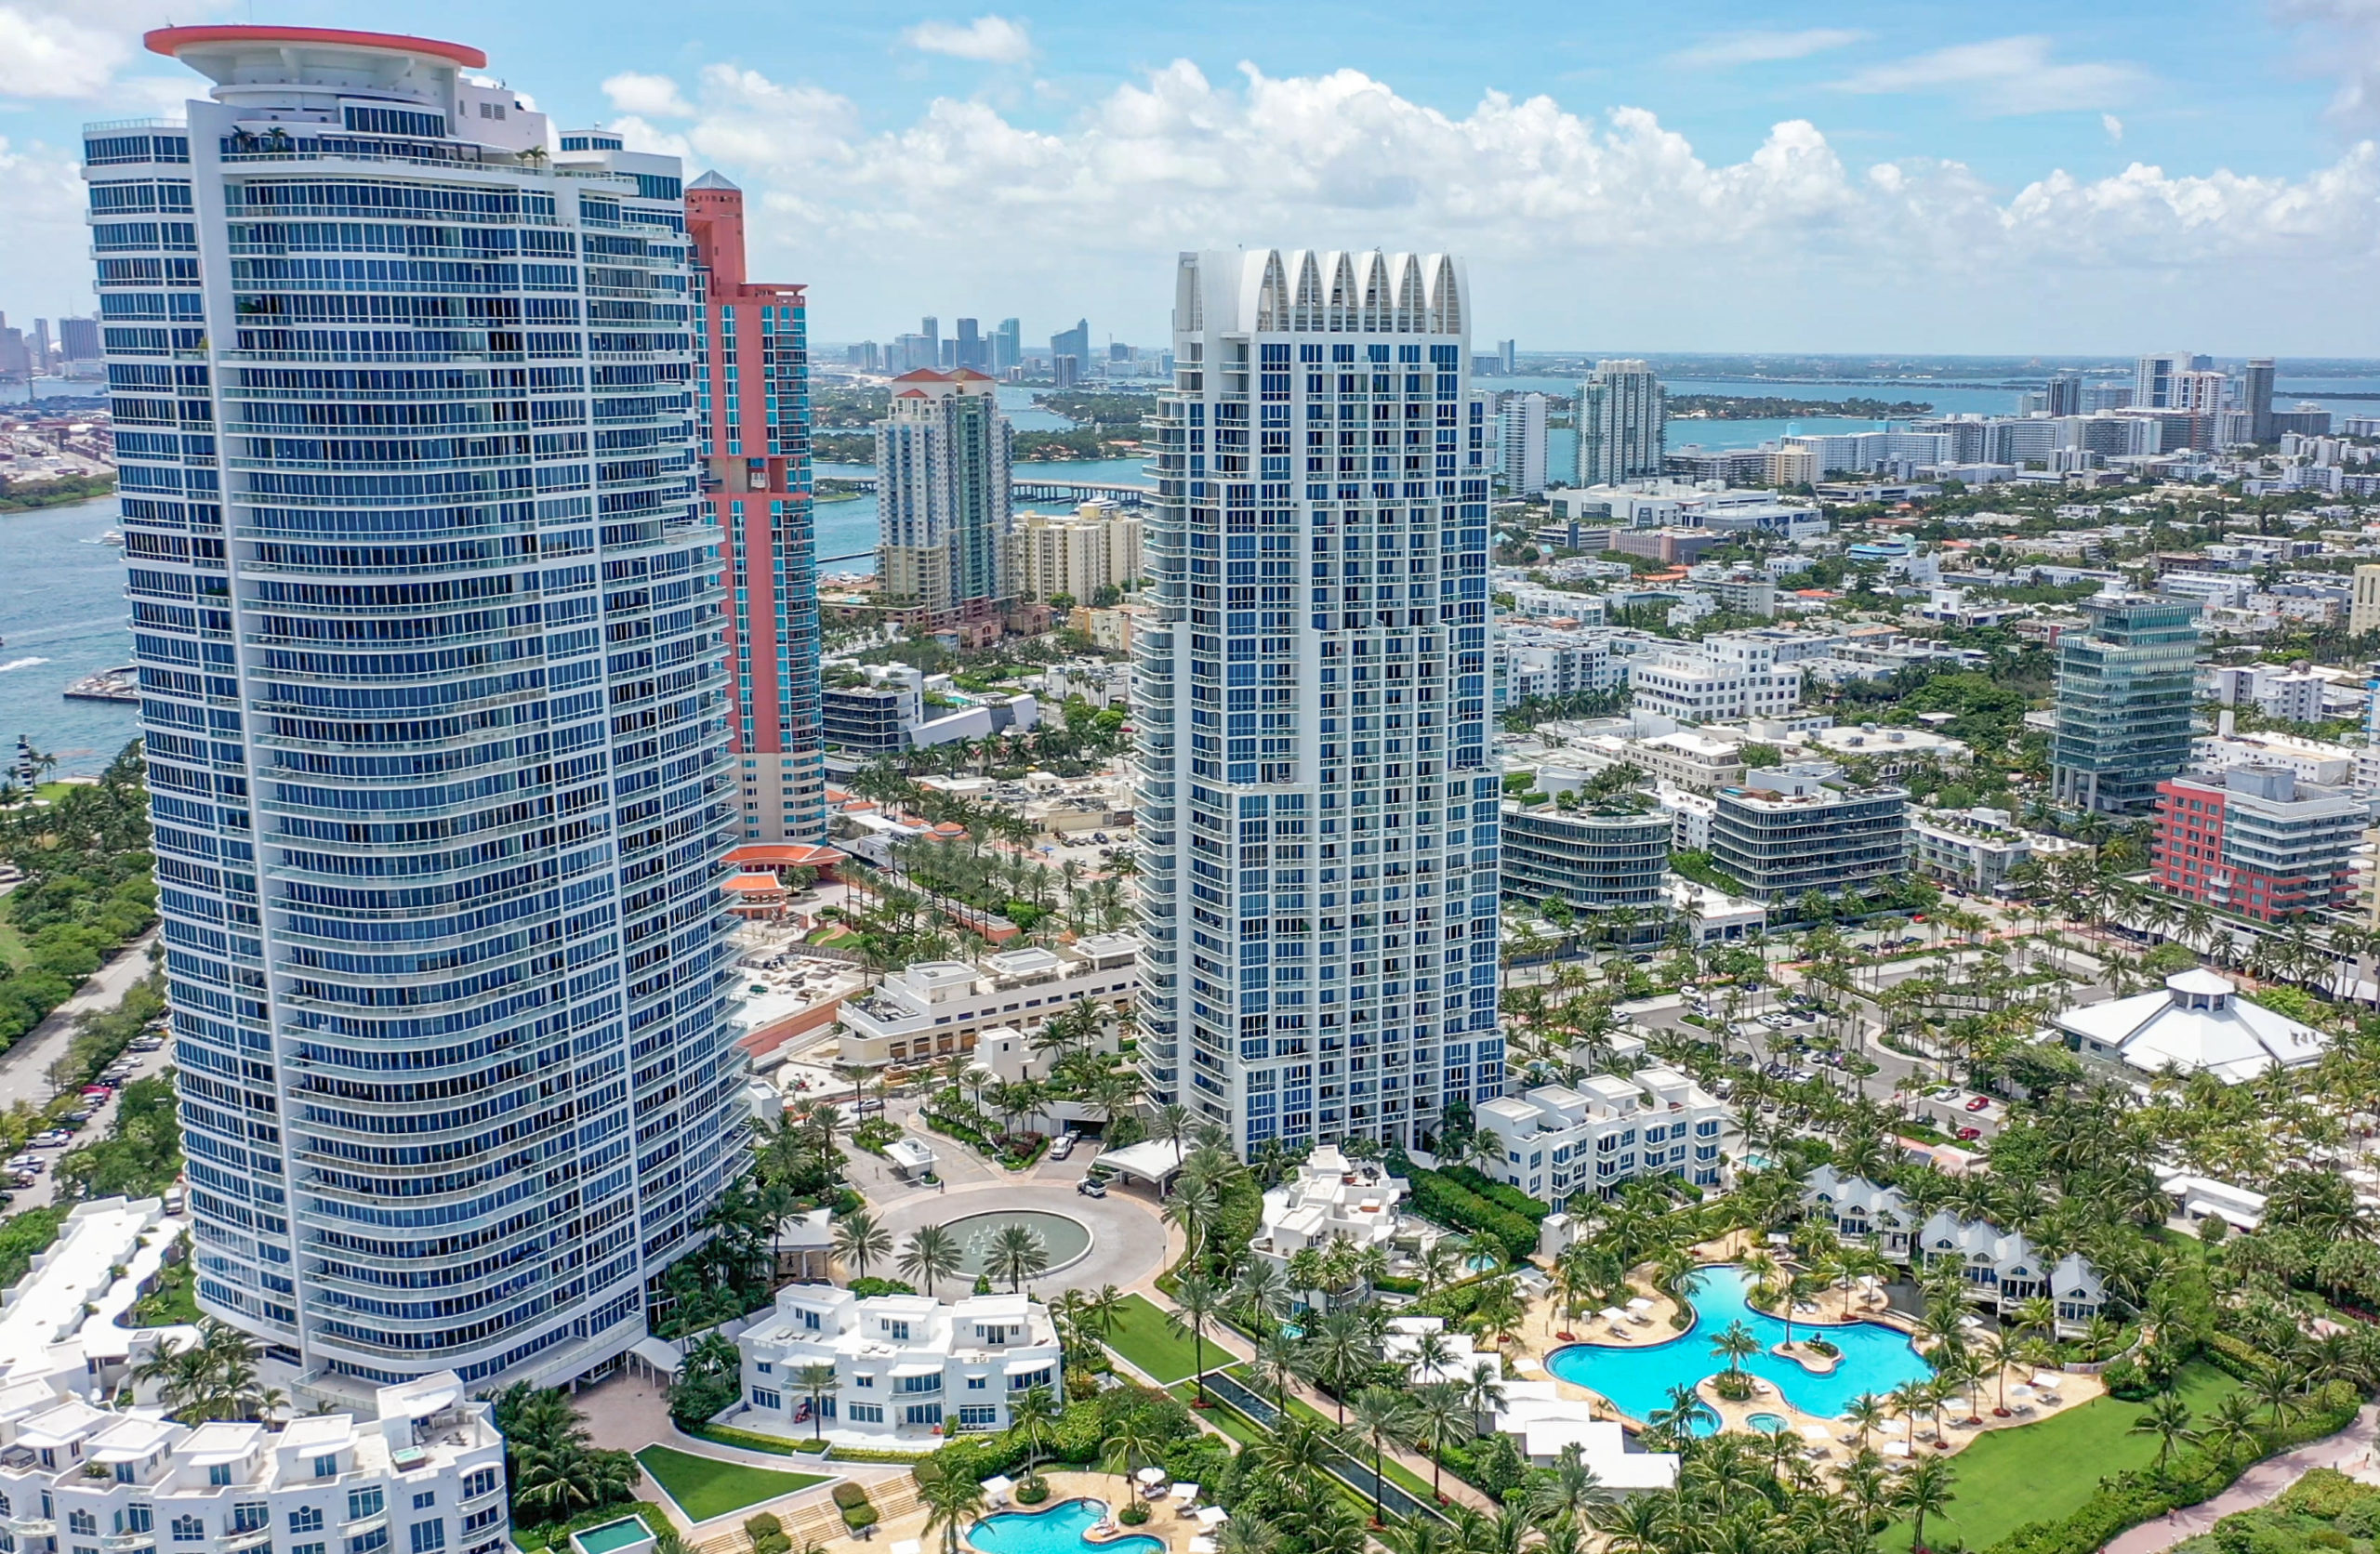 Three Major Sales in One Week at Continuum on South Beach